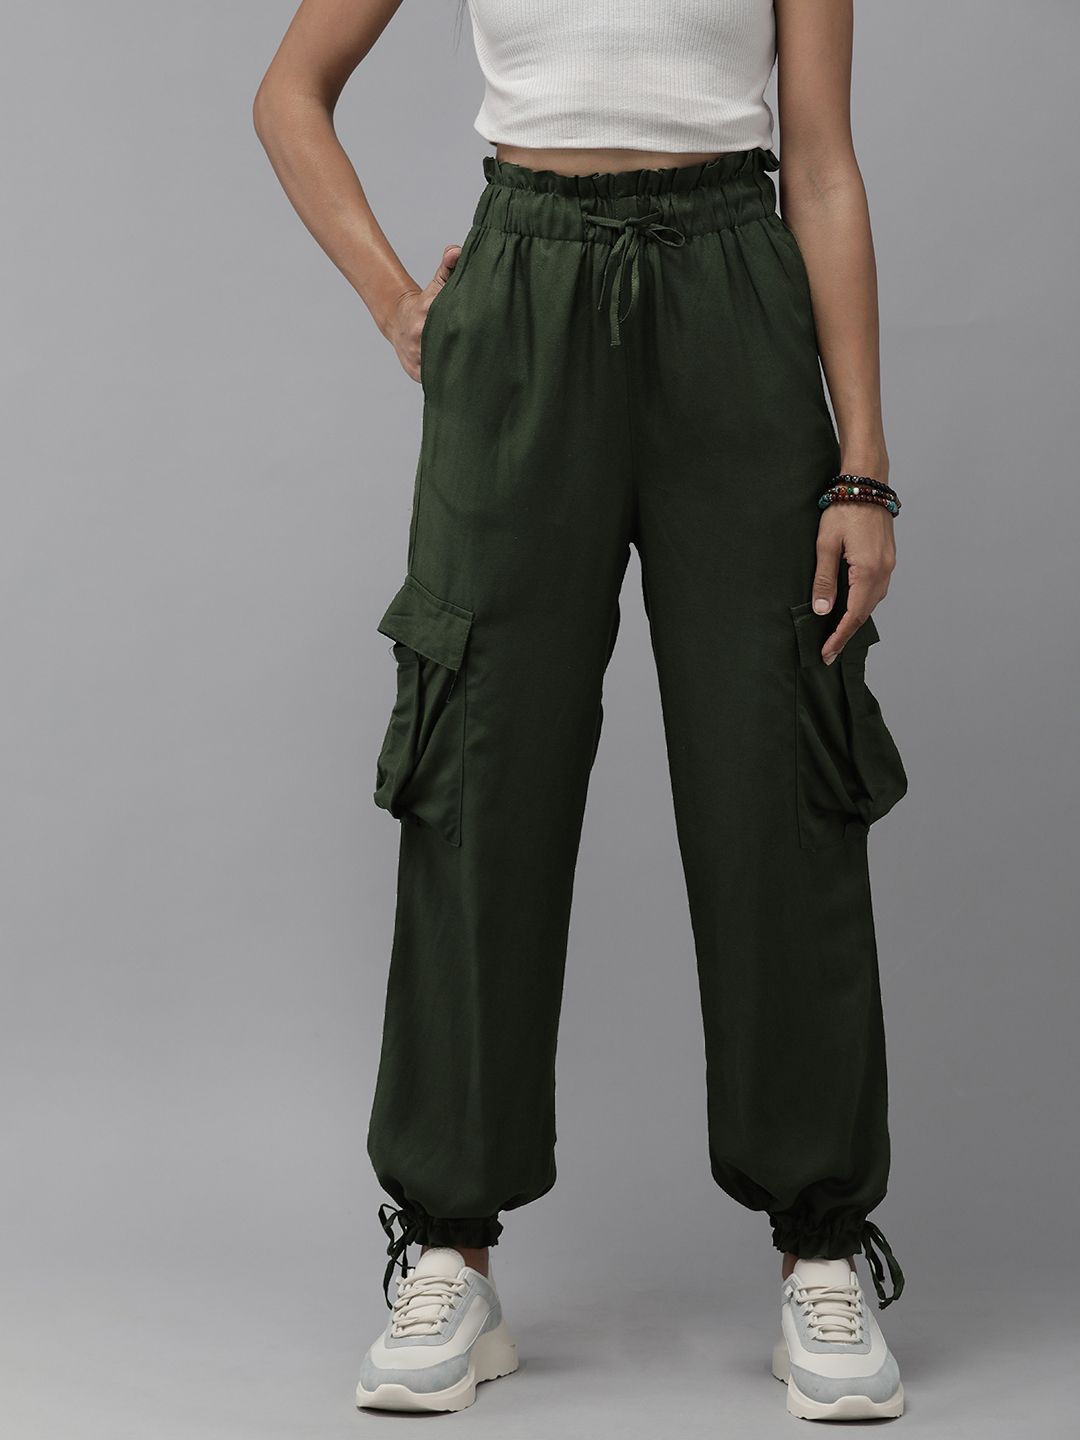 The Roadster Lifestyle Co. Women Olive Green Solid Pleated Joggers Price in India